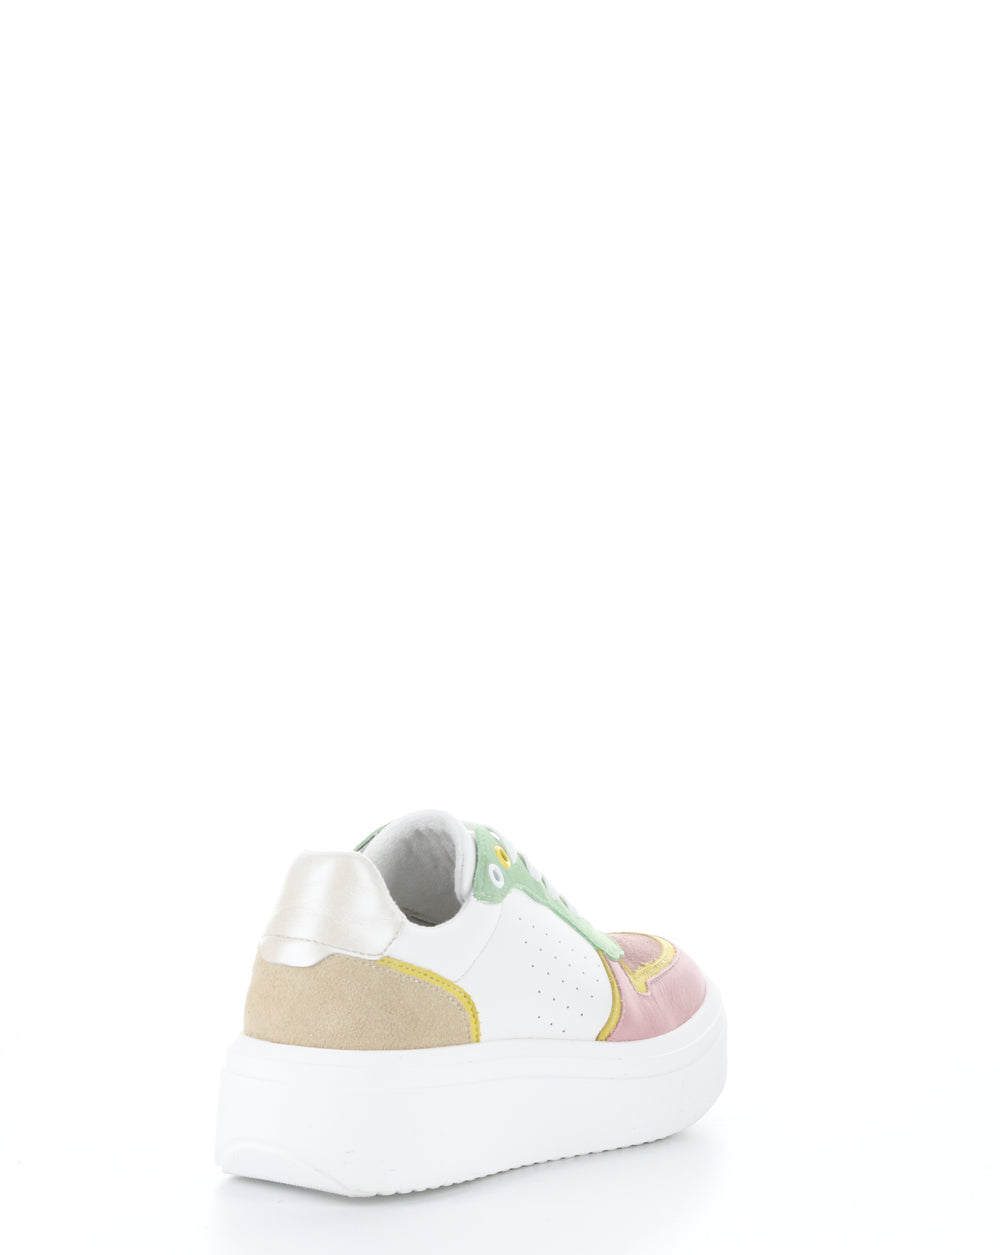 FULTON PINK/WHITE MULTI Lace-up Shoes